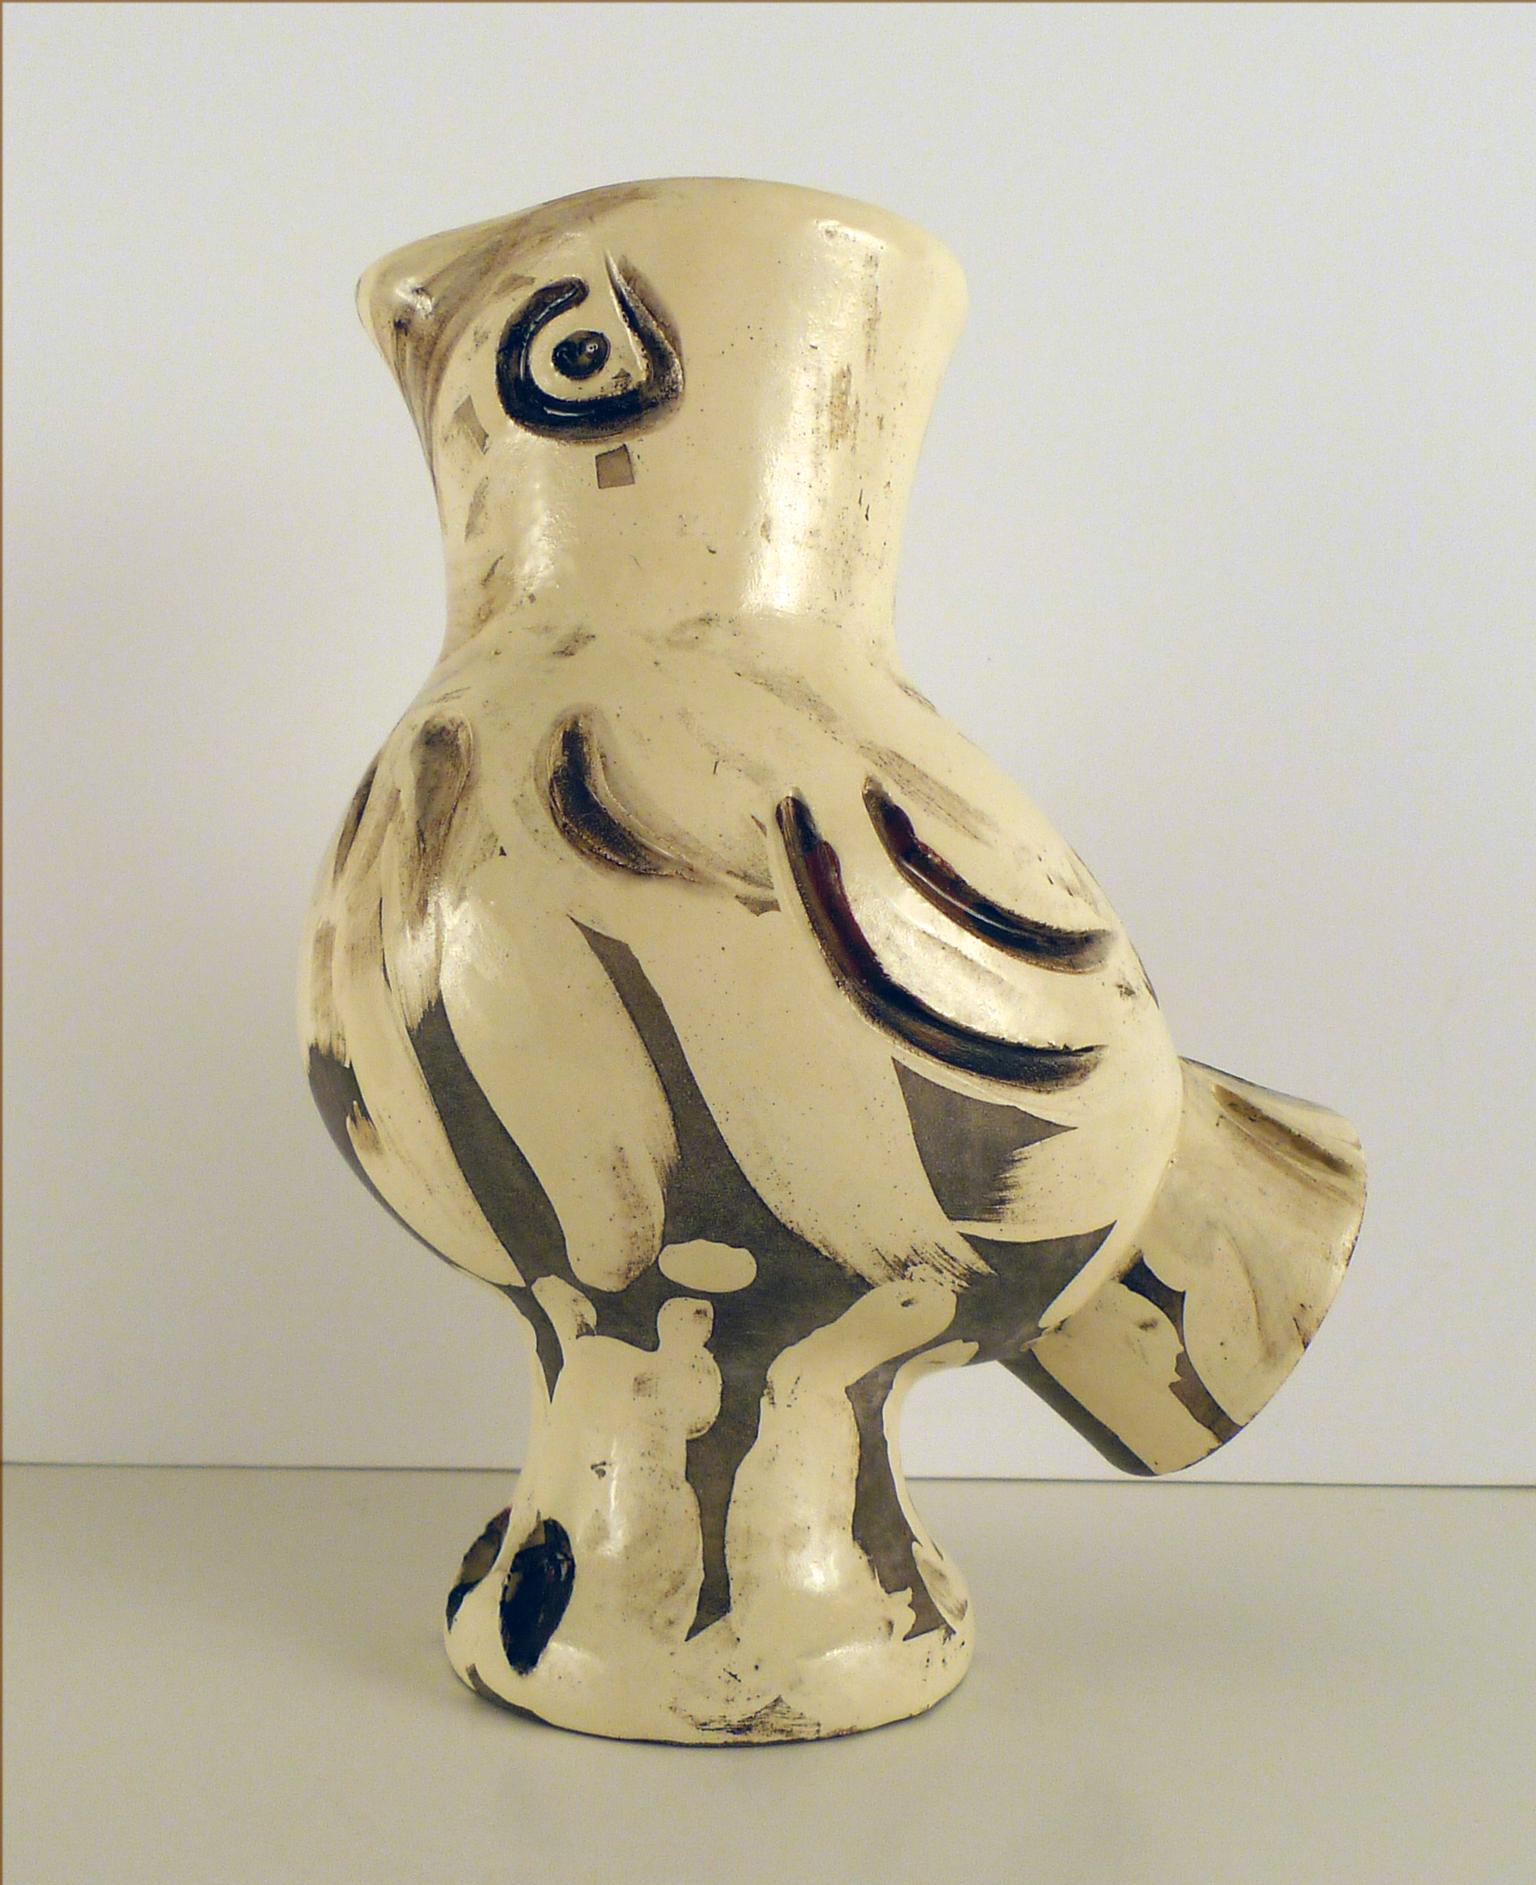 Chouette (A.R. 603), 1969. Ceramic Stamped 'Madoura Plein Feu / Edition Picasso' - Art by Pablo Picasso